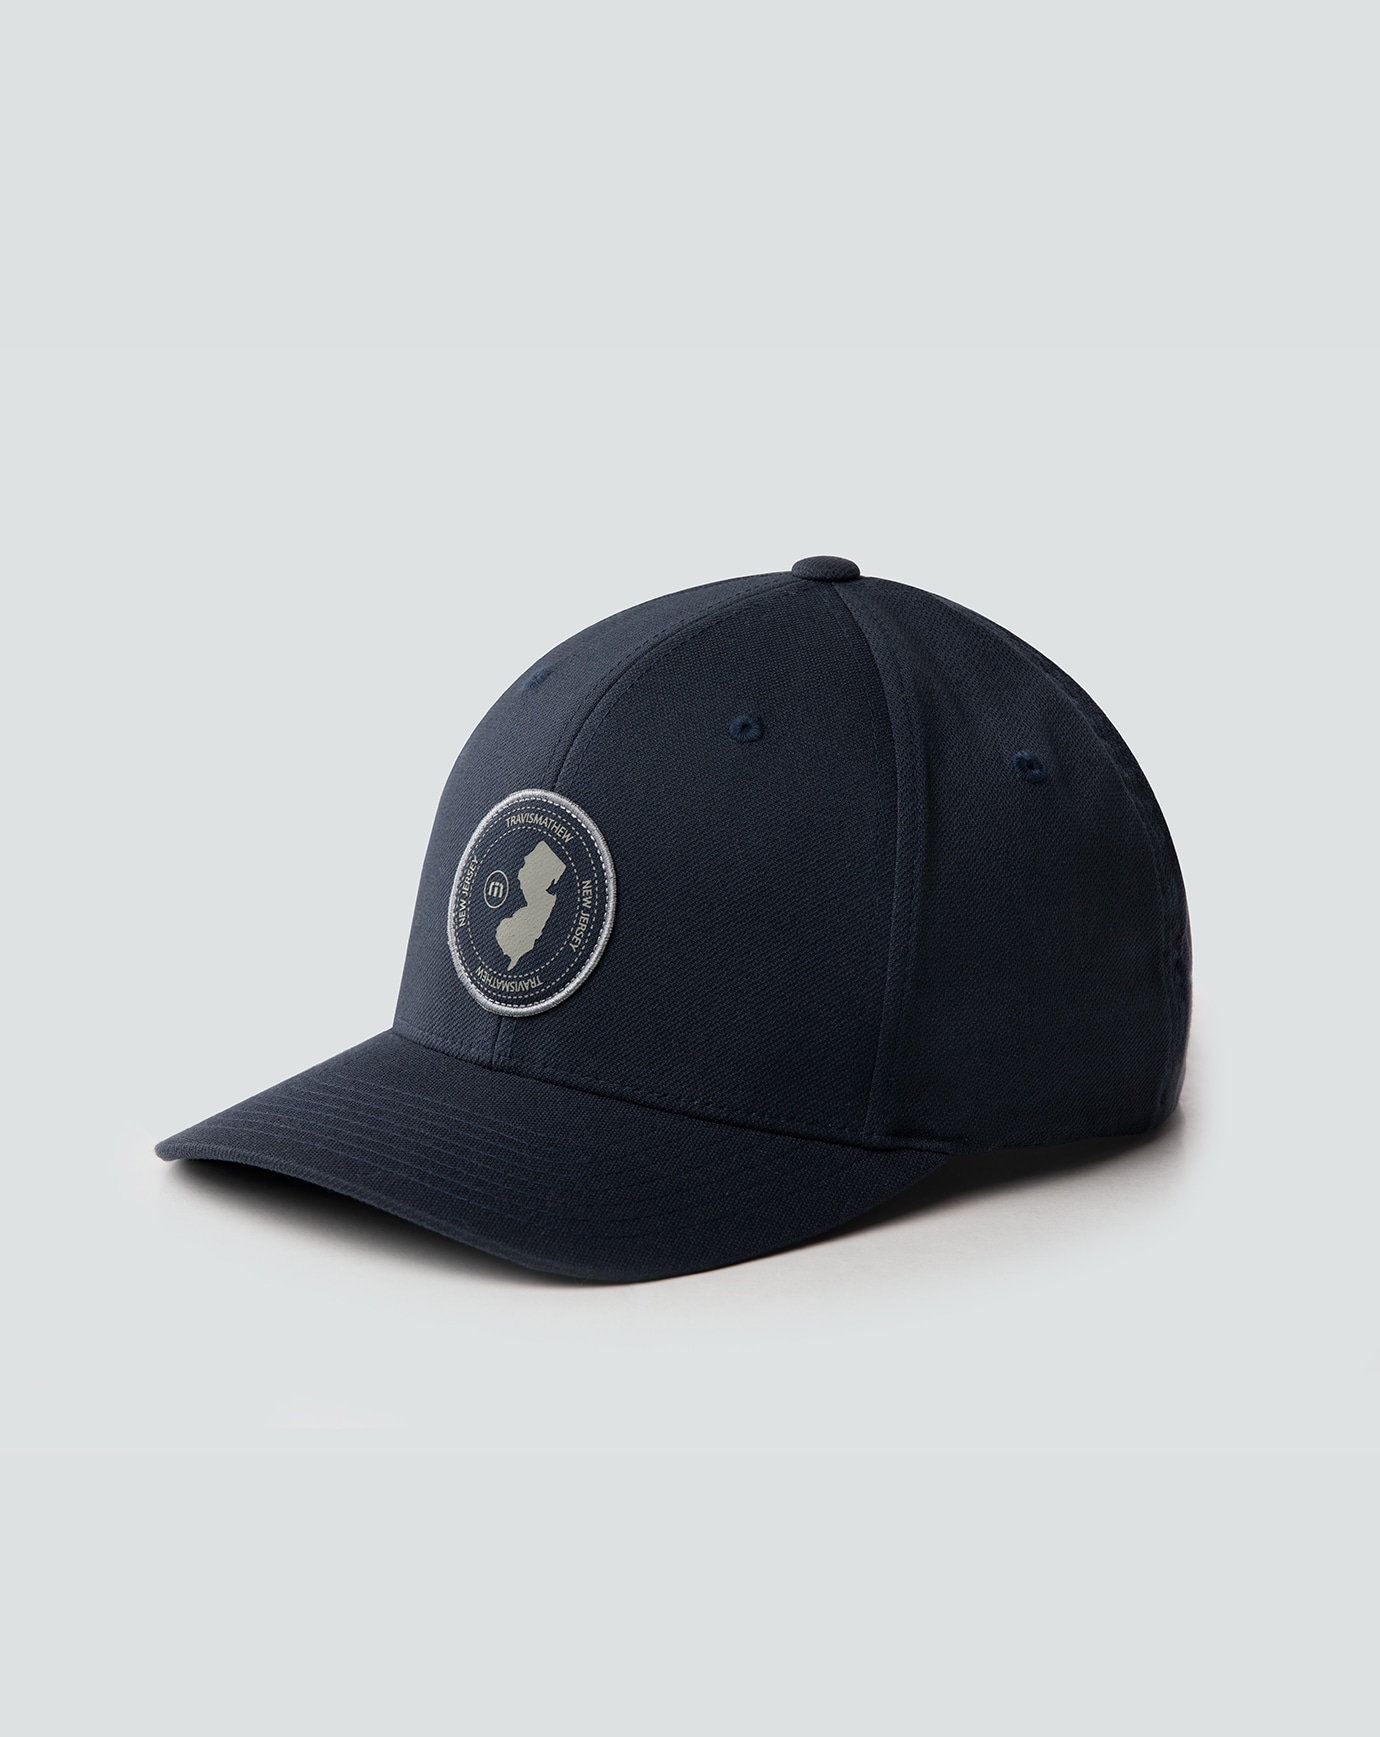 EAST COAST TIME FITTED HAT Image Thumbnail 2